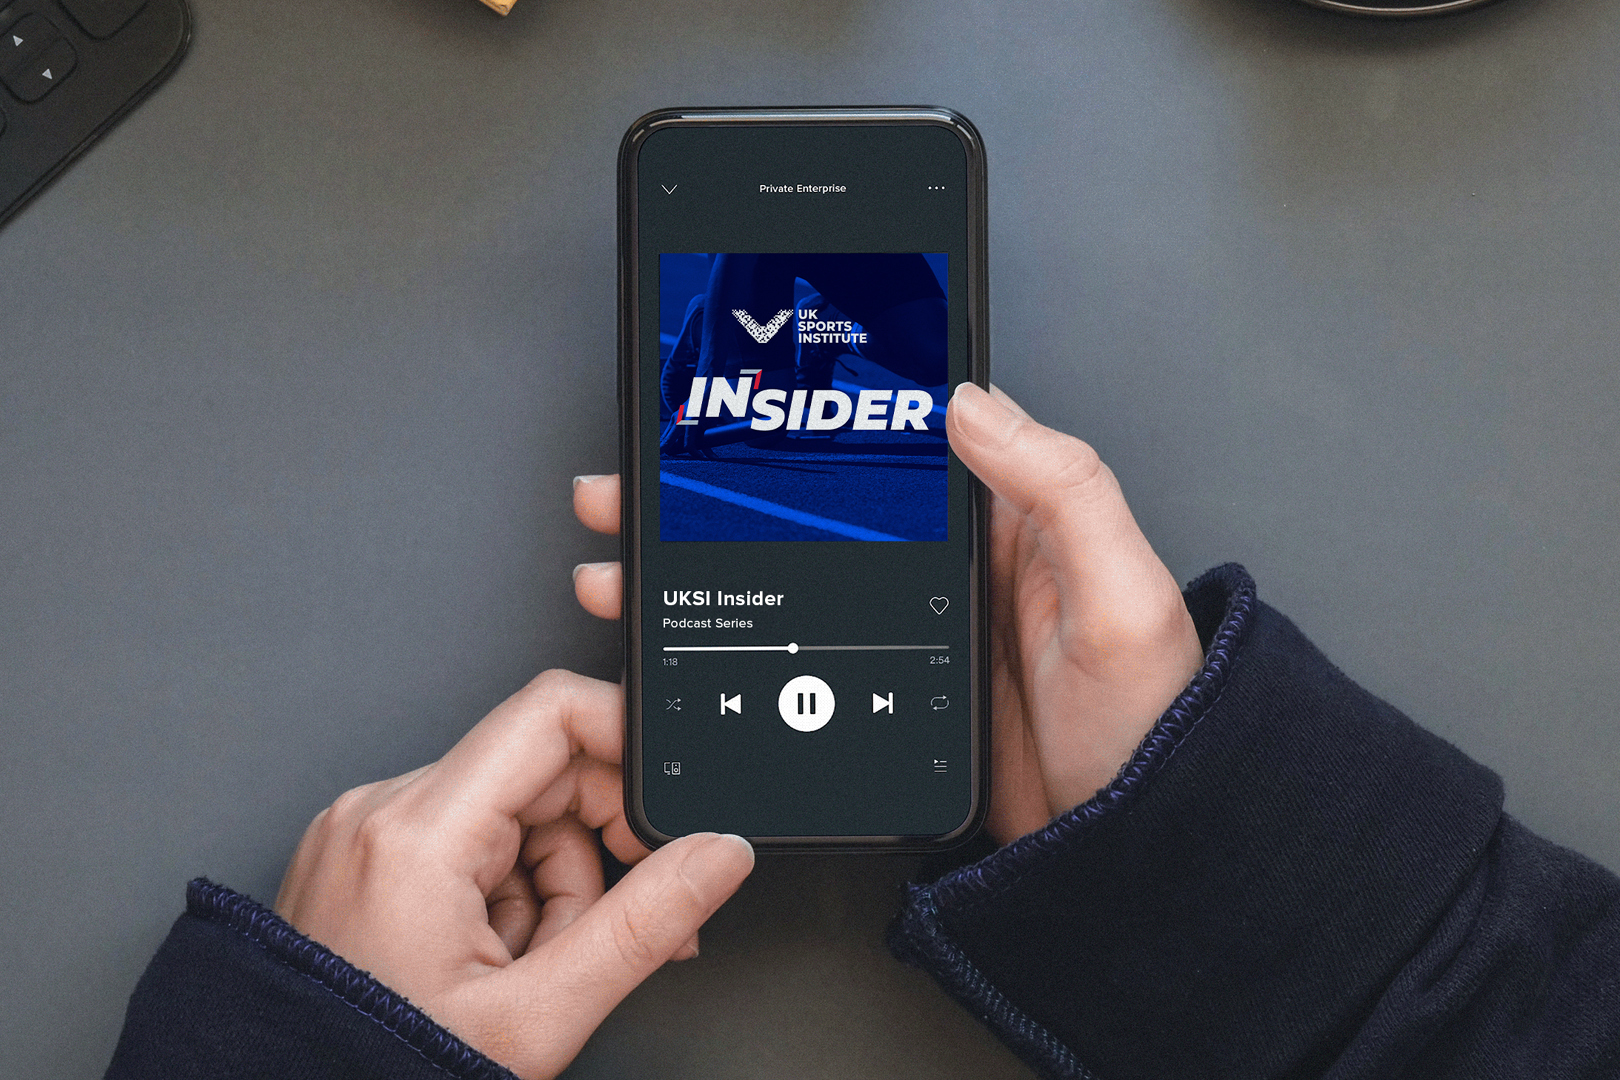 UKSI Insider Podcast launched